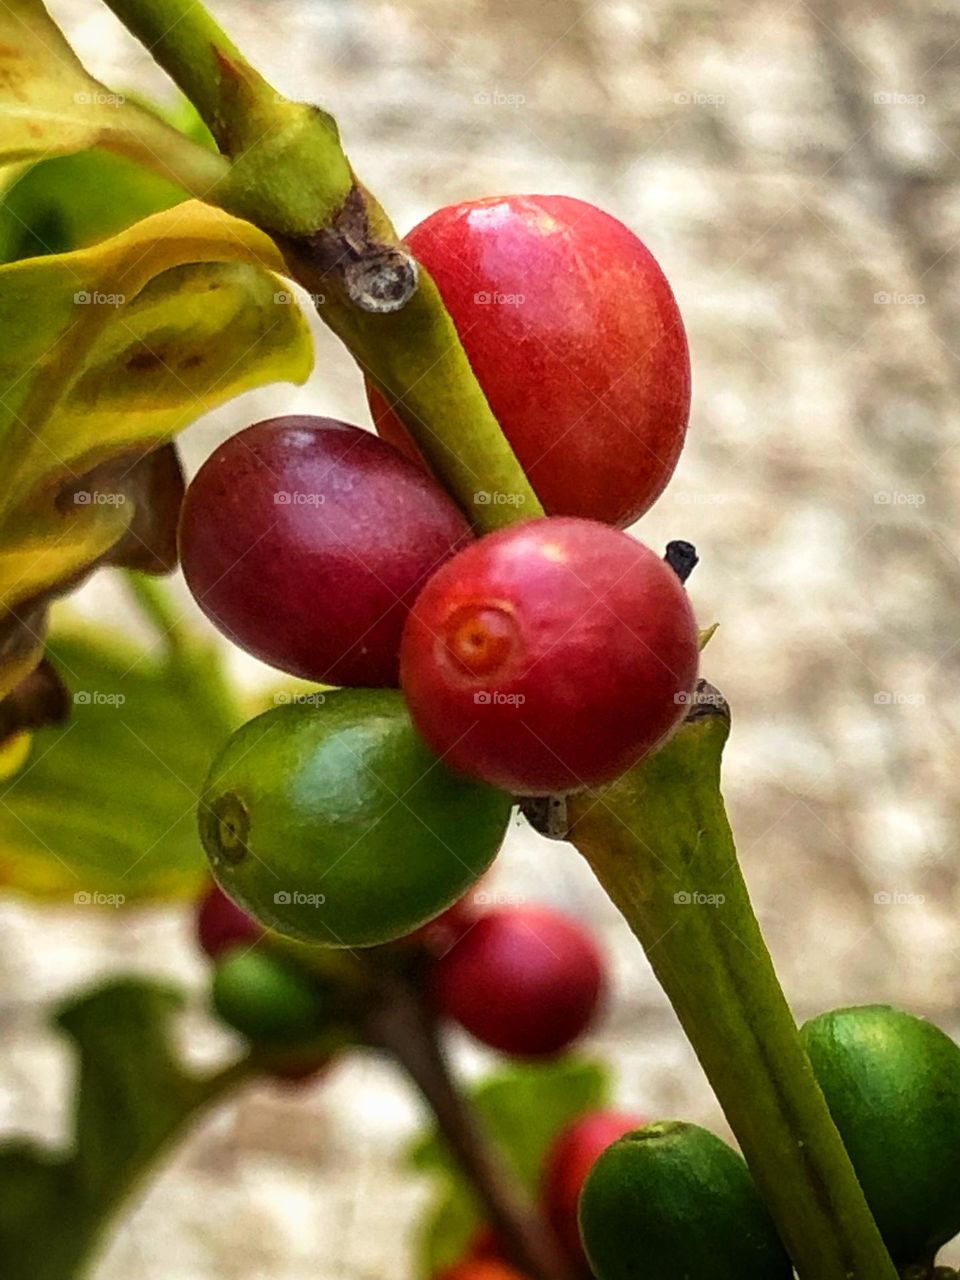 Coffee fruit still on the branch of the coffee tree.